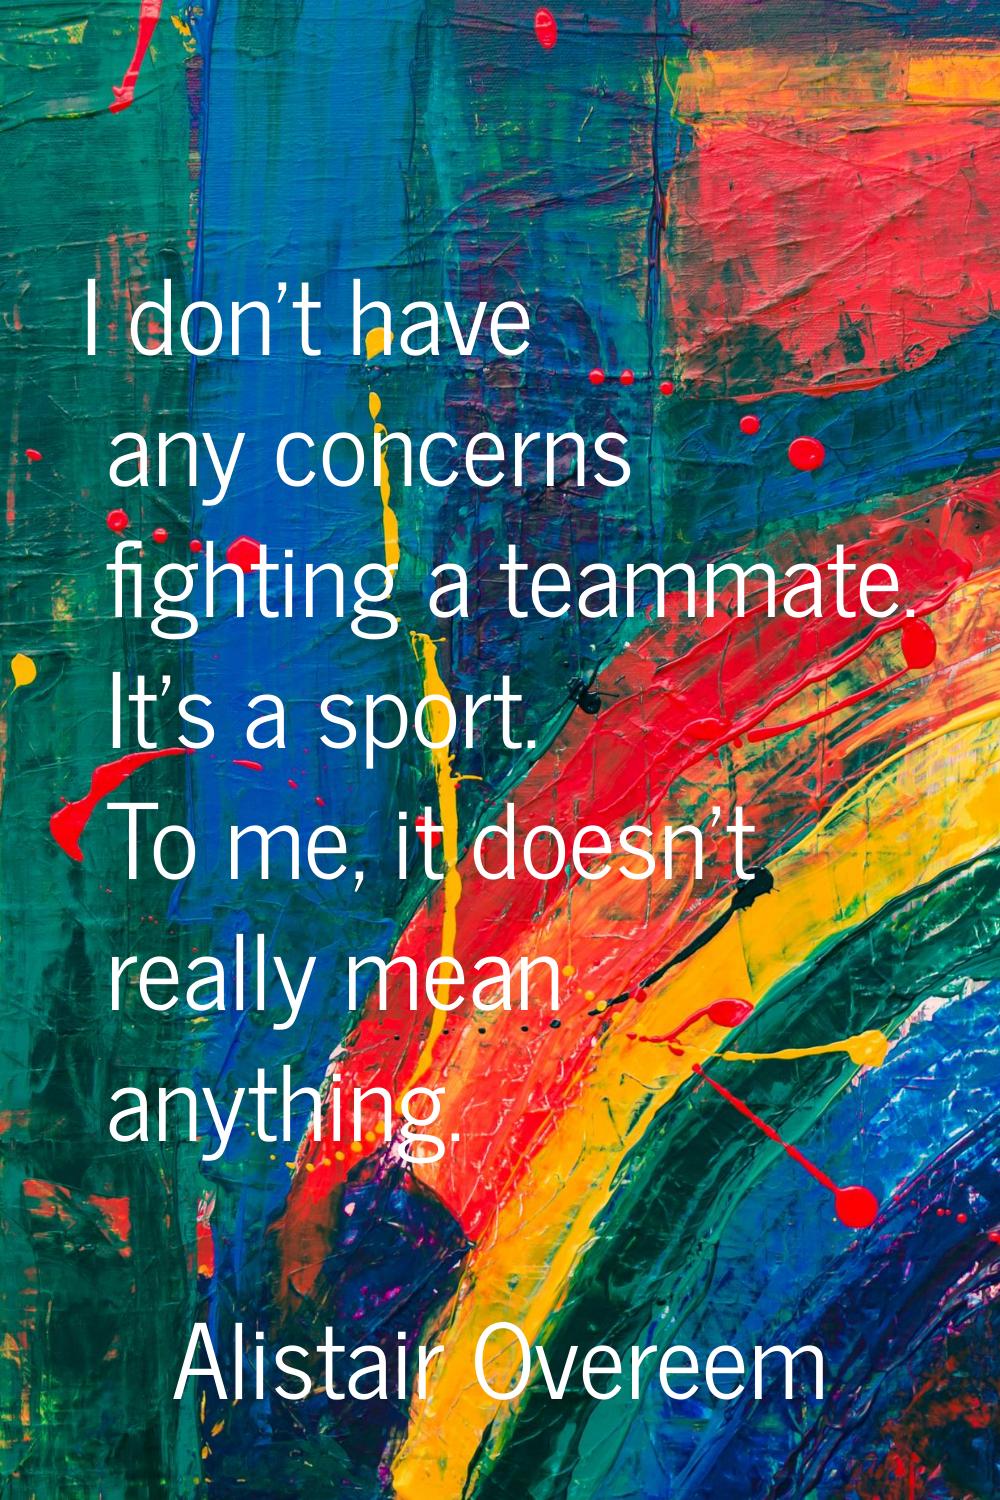 I don't have any concerns fighting a teammate. It's a sport. To me, it doesn't really mean anything